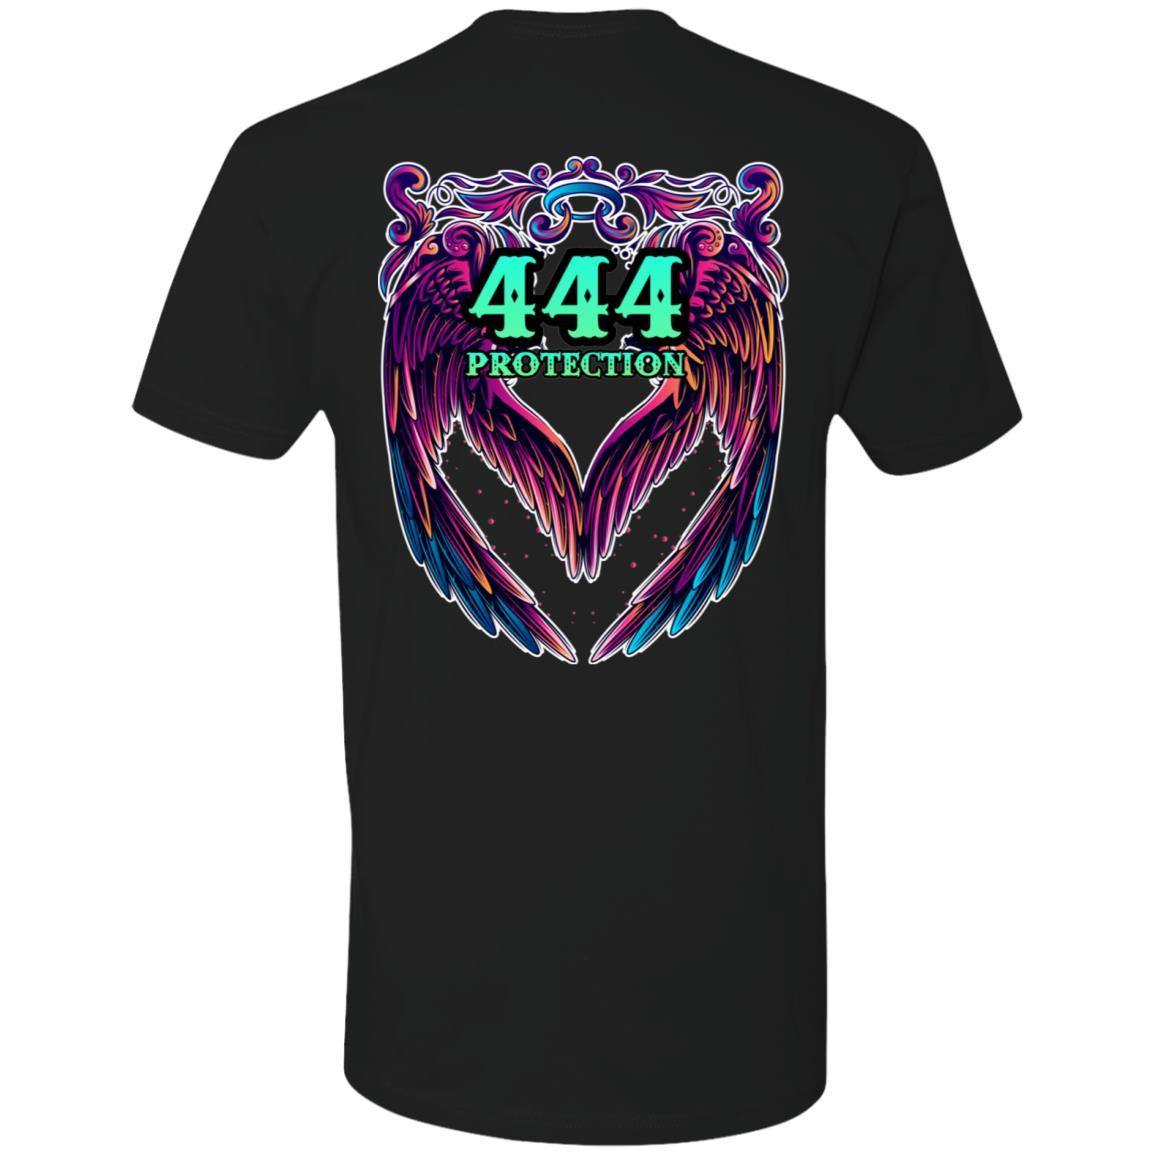 444 Angel Number - Protection - Design On Back - Scorp Zone Logo On Front - Premium Short Sleeve T-Shirt - ScorpZone